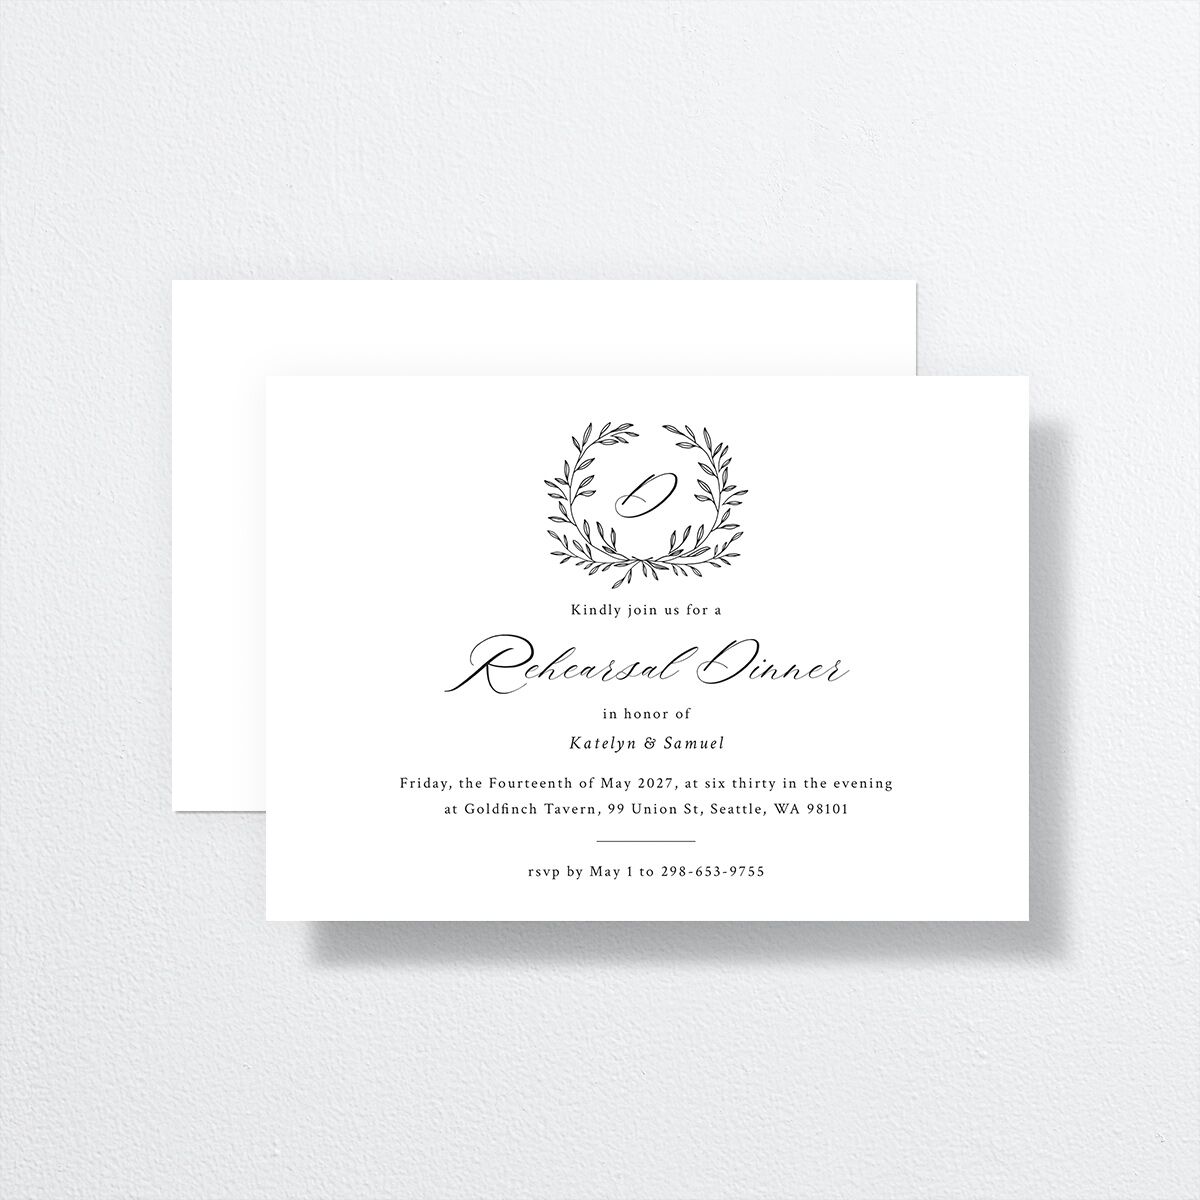 Monogram Wreath Rehearsal Dinner Invitations front-and-back